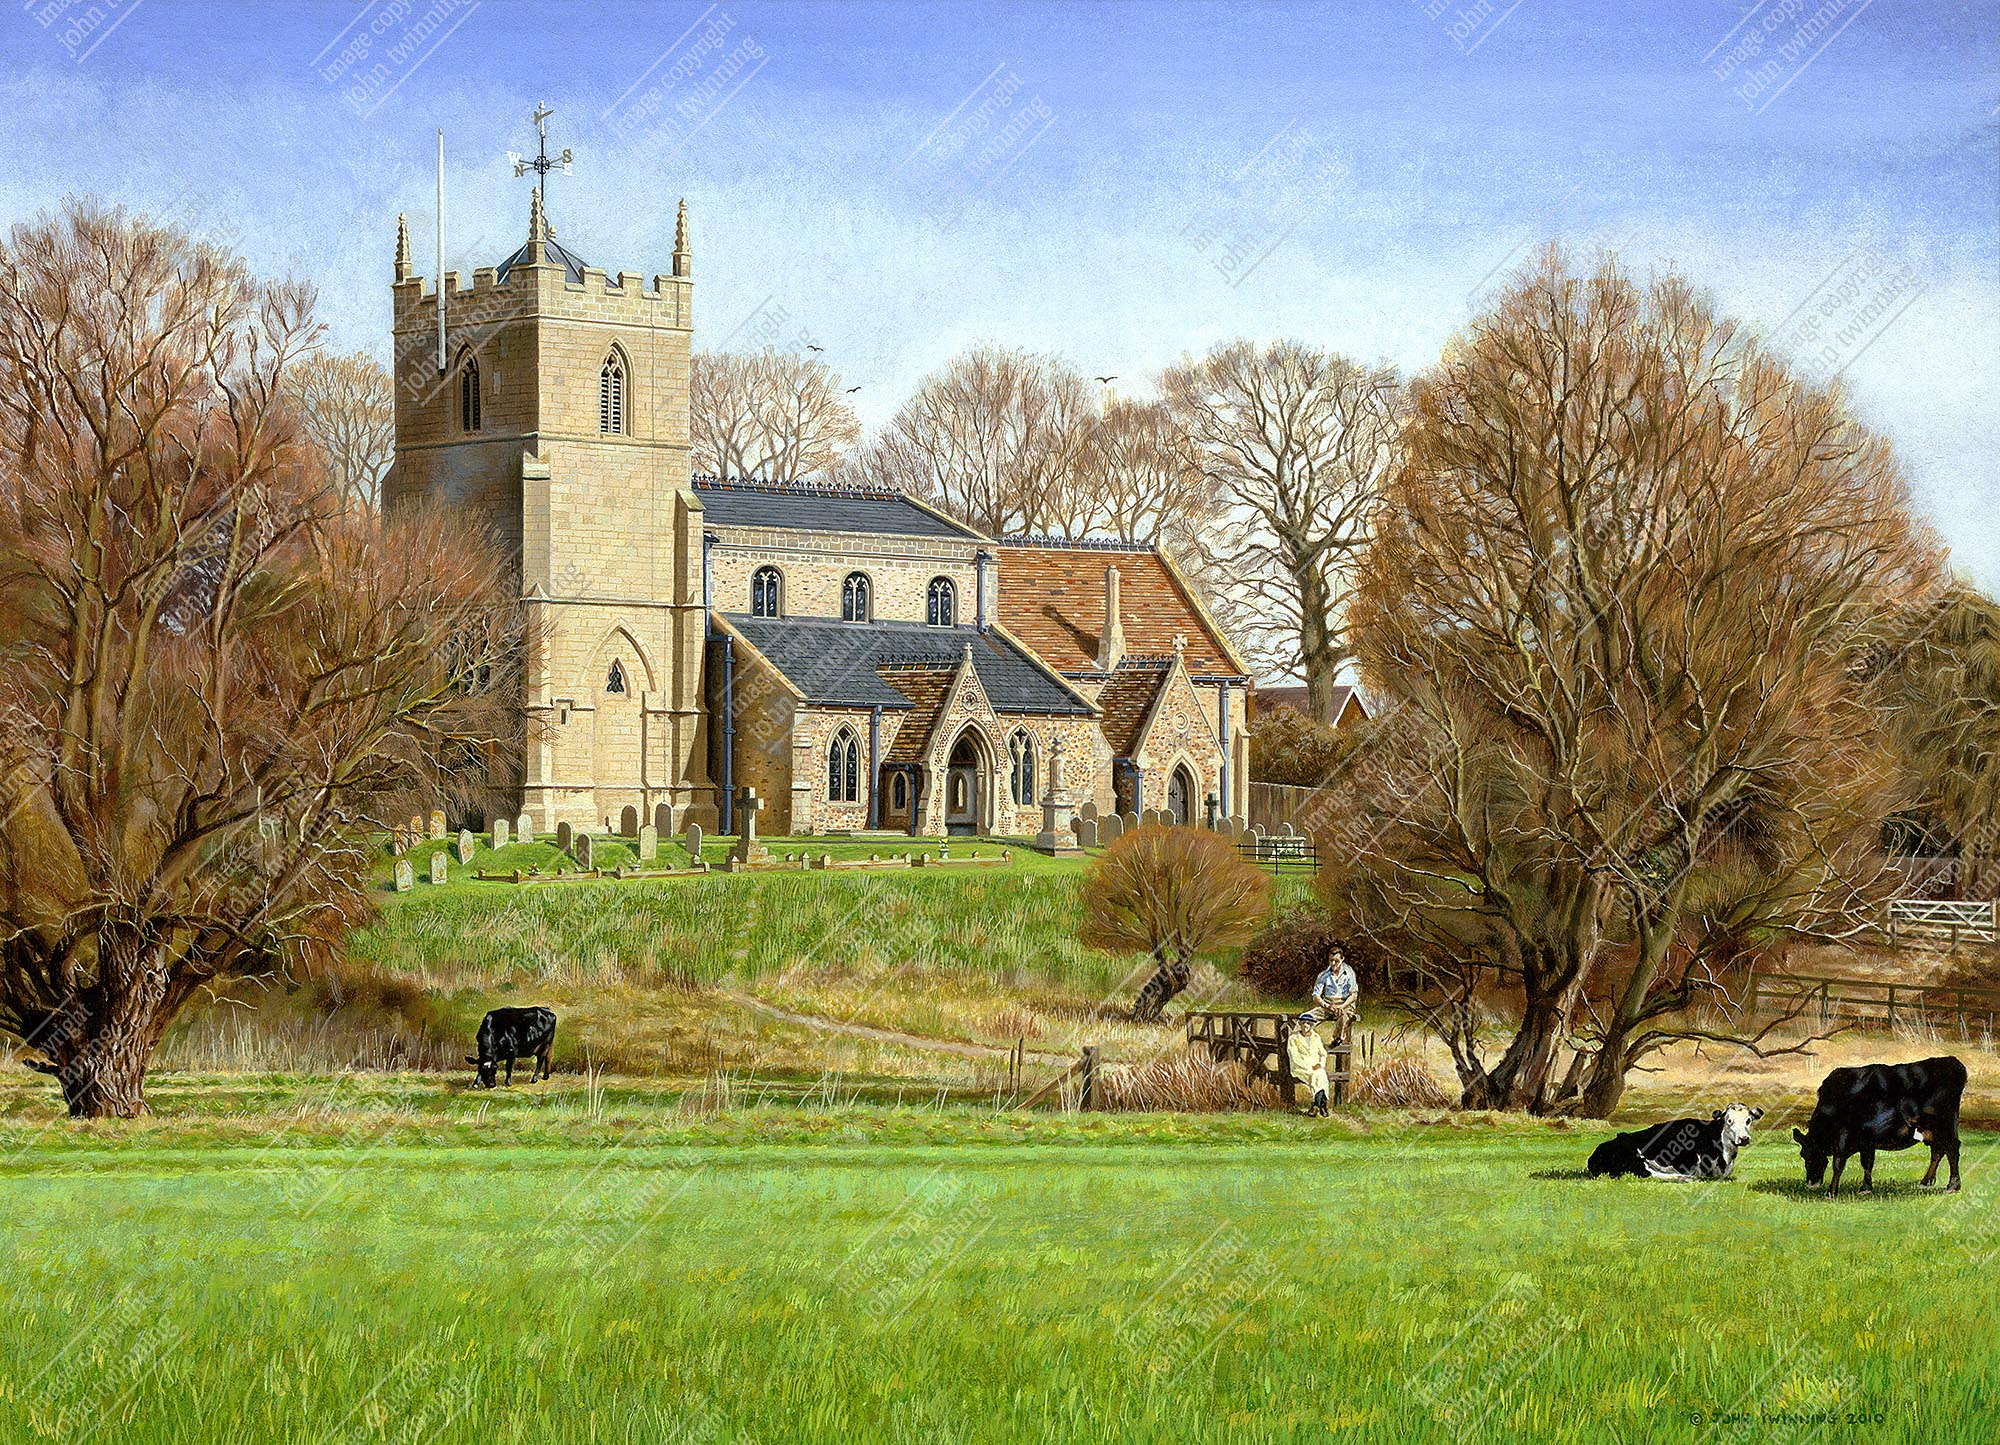 ‘St. John The Baptist Church Holywell, Spring’ – art print from a commissioned watercolour painting of this village church